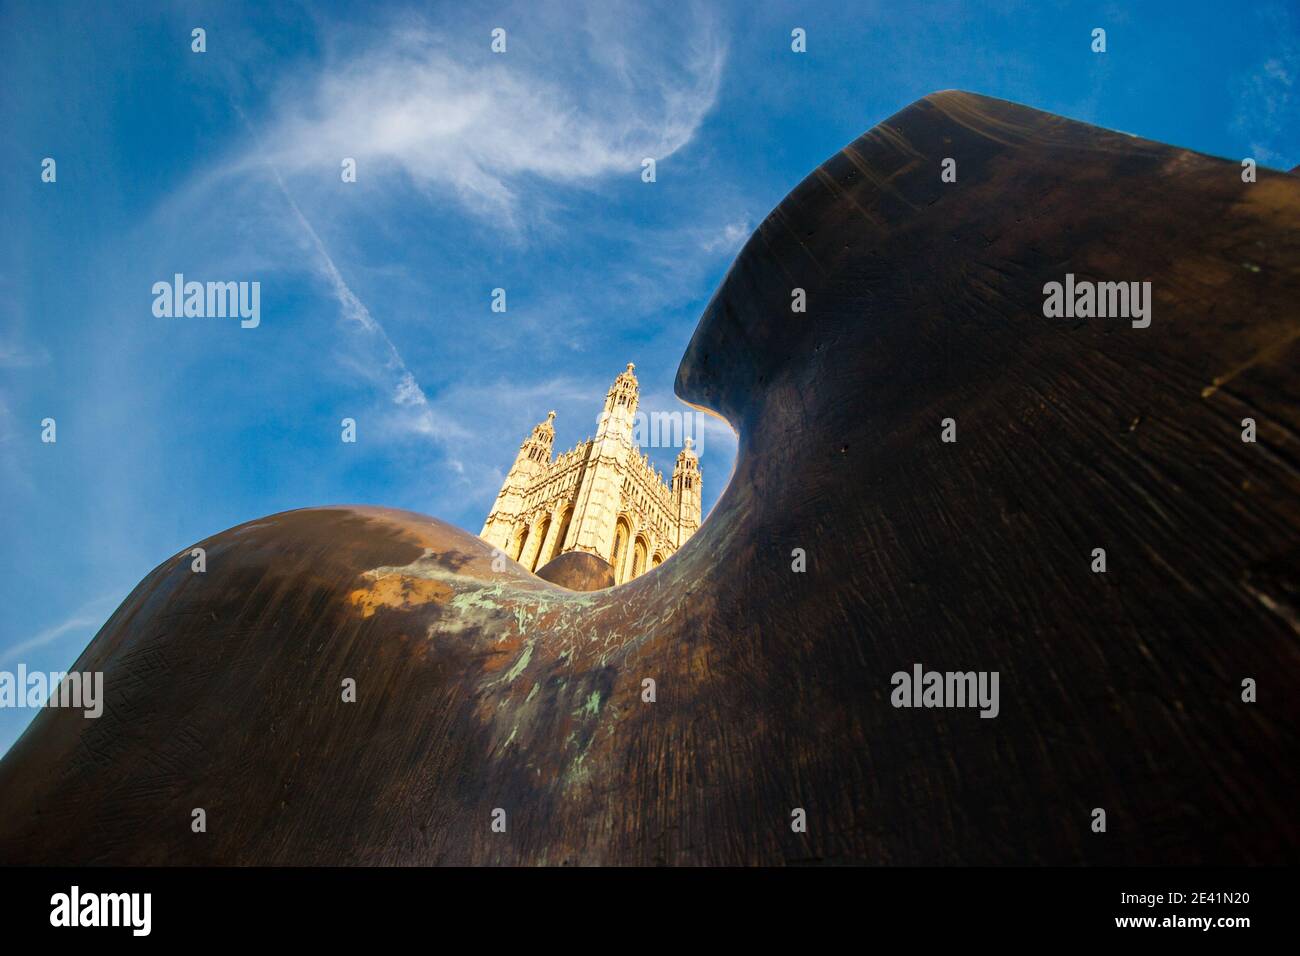 Victoria Tower Westminster e Henry Moore's Knife Edge in due pezzi Scultura su College Green - Londra UK Foto Stock